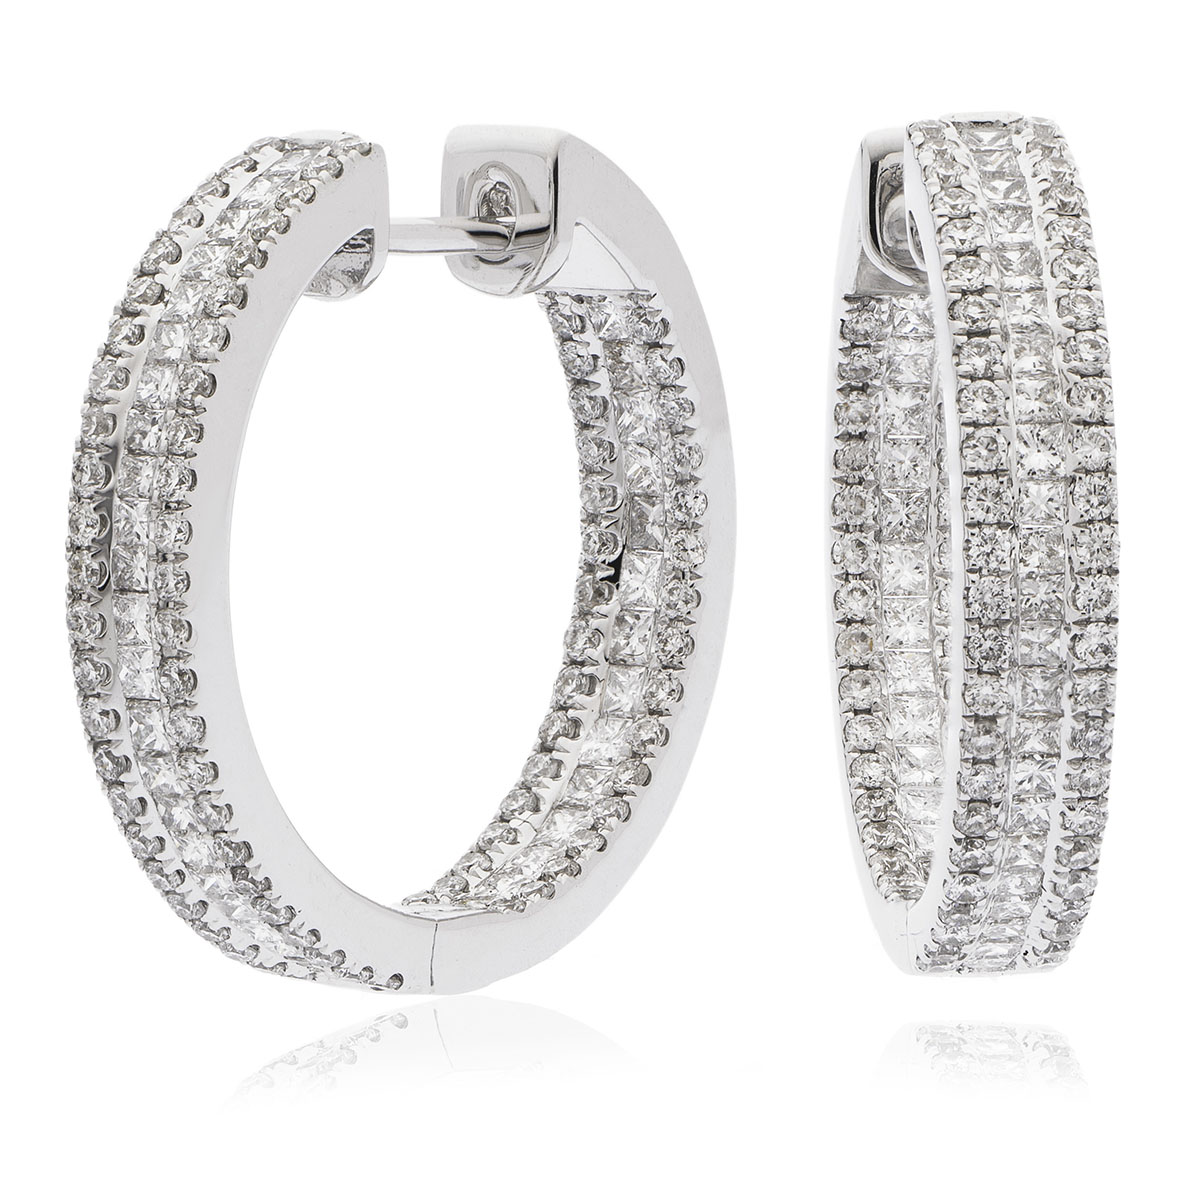 3 Row Princess Cut In And Out Diamond Hoops Earrings